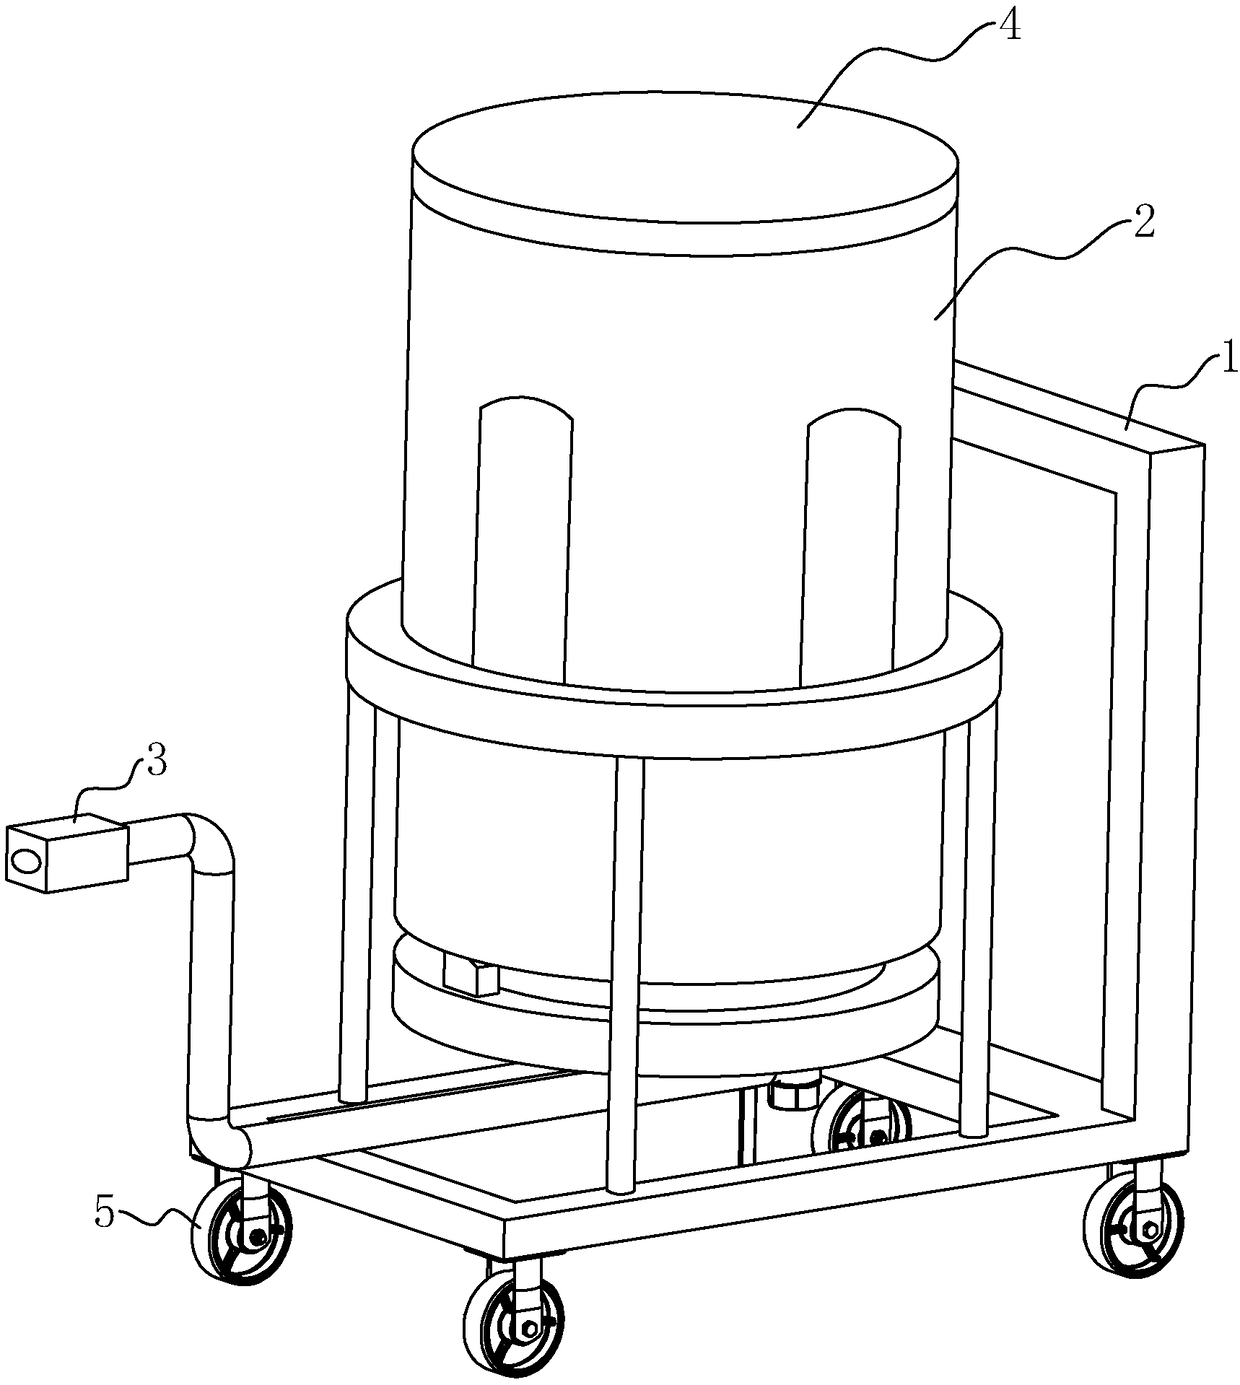 Spraying device for buildings